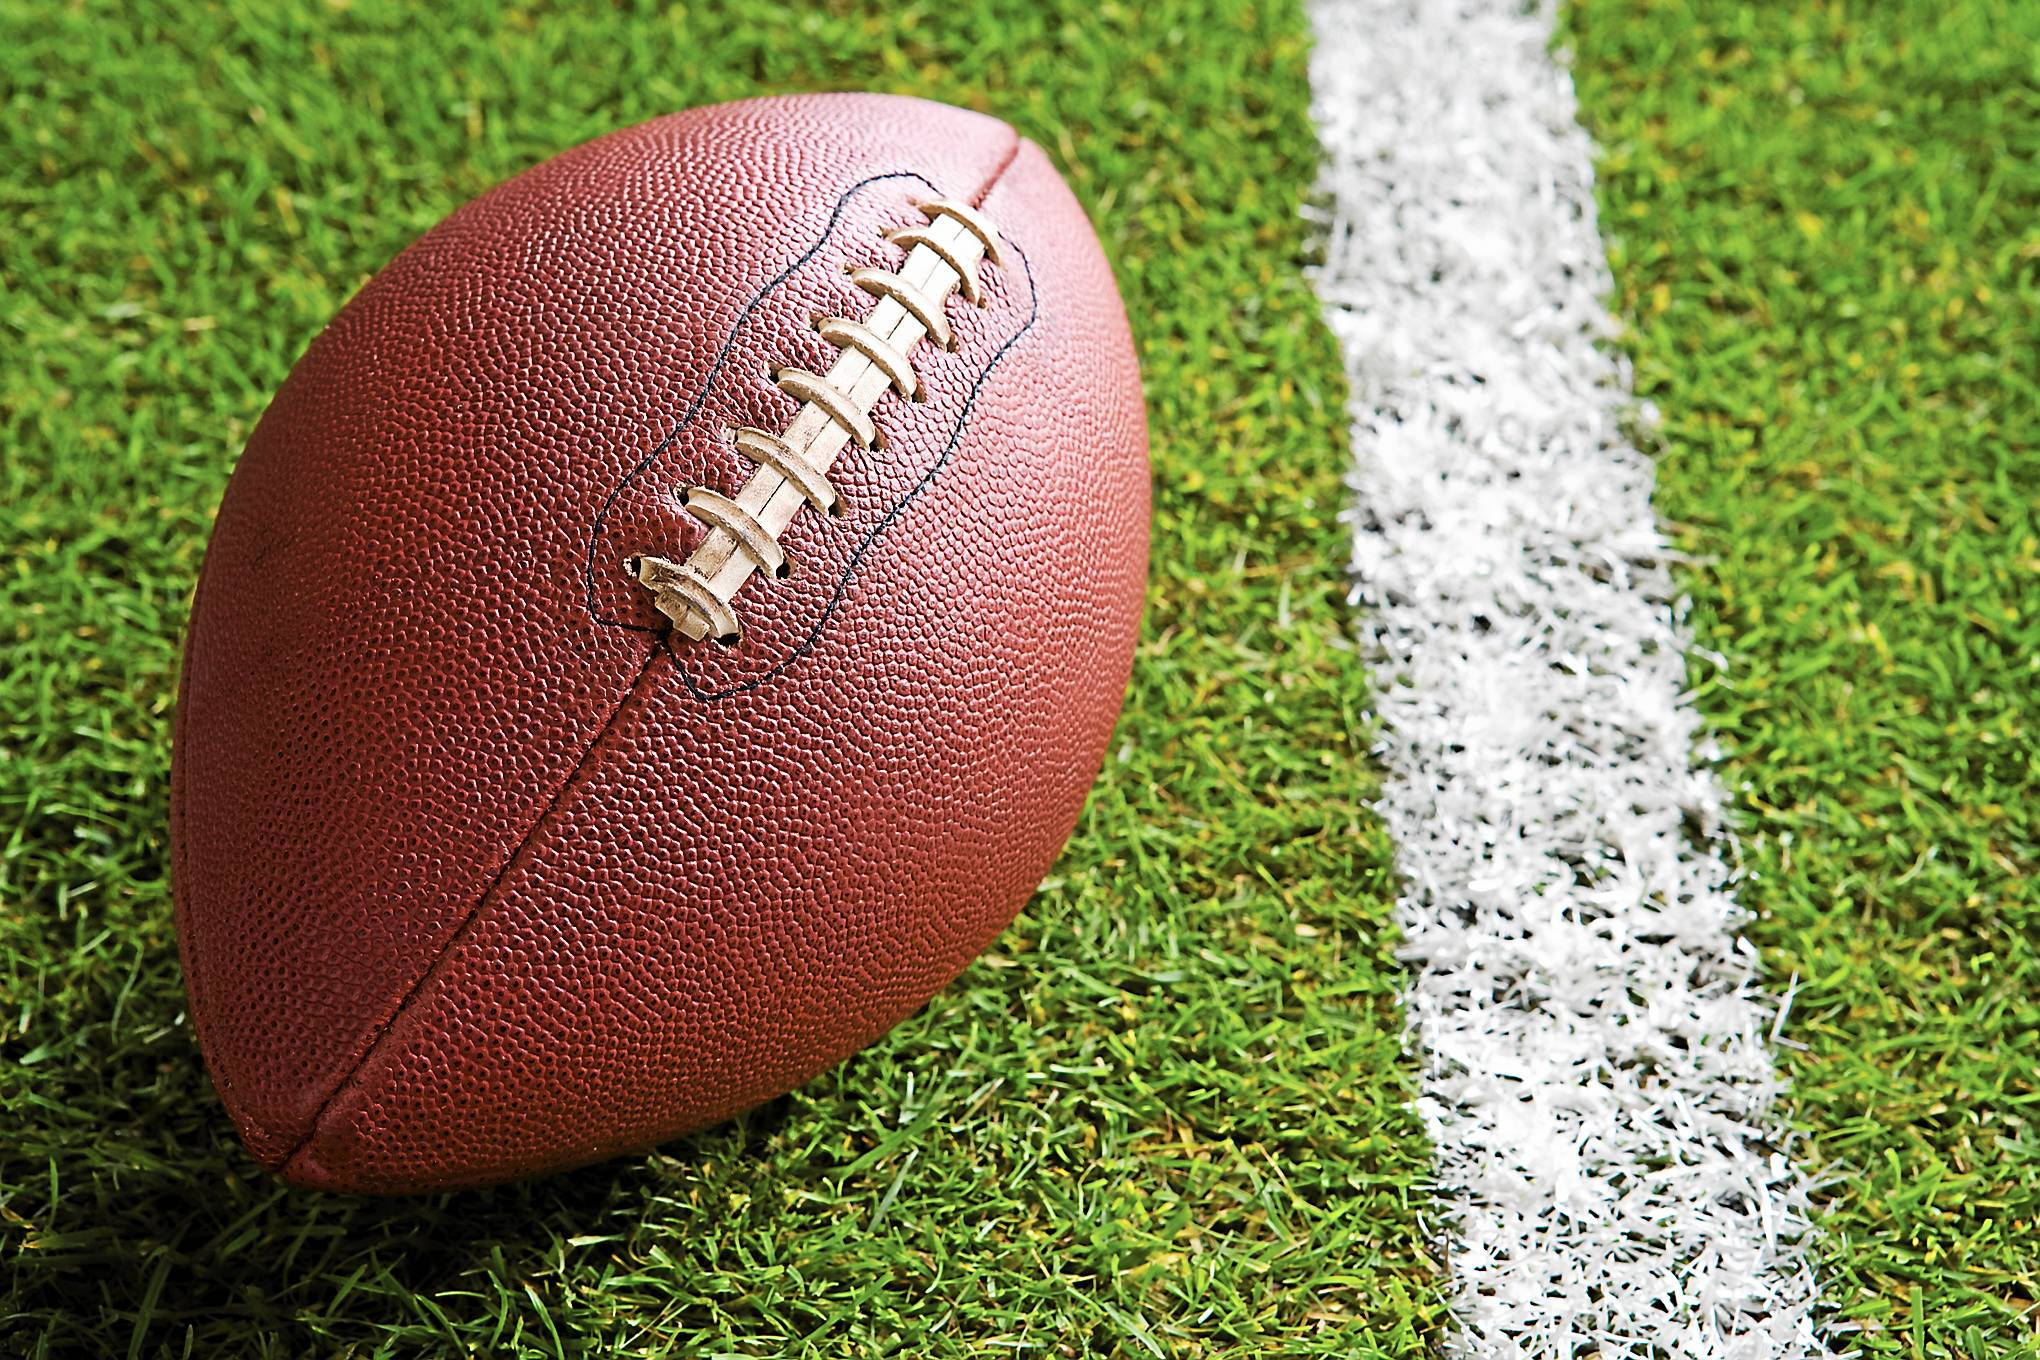 PIAA weighing changes football schedule Football